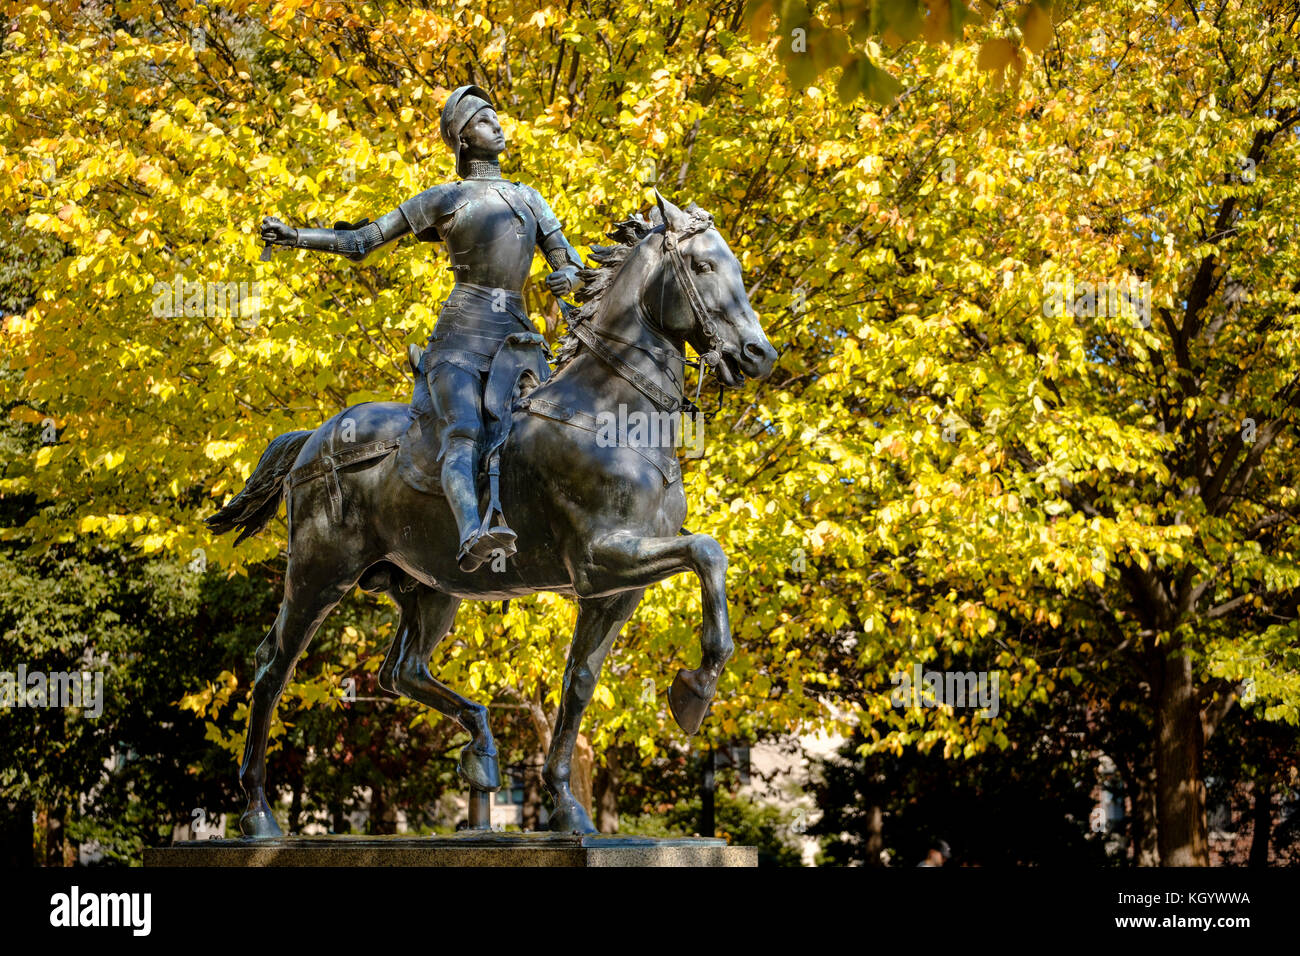 Joan of Arc (Jeanne D'arc) bronze statue, by Paul Dubois, at Meridian Hill Park, Columbia Heights, Washington, D.C., United States of America, USA. Stock Photo